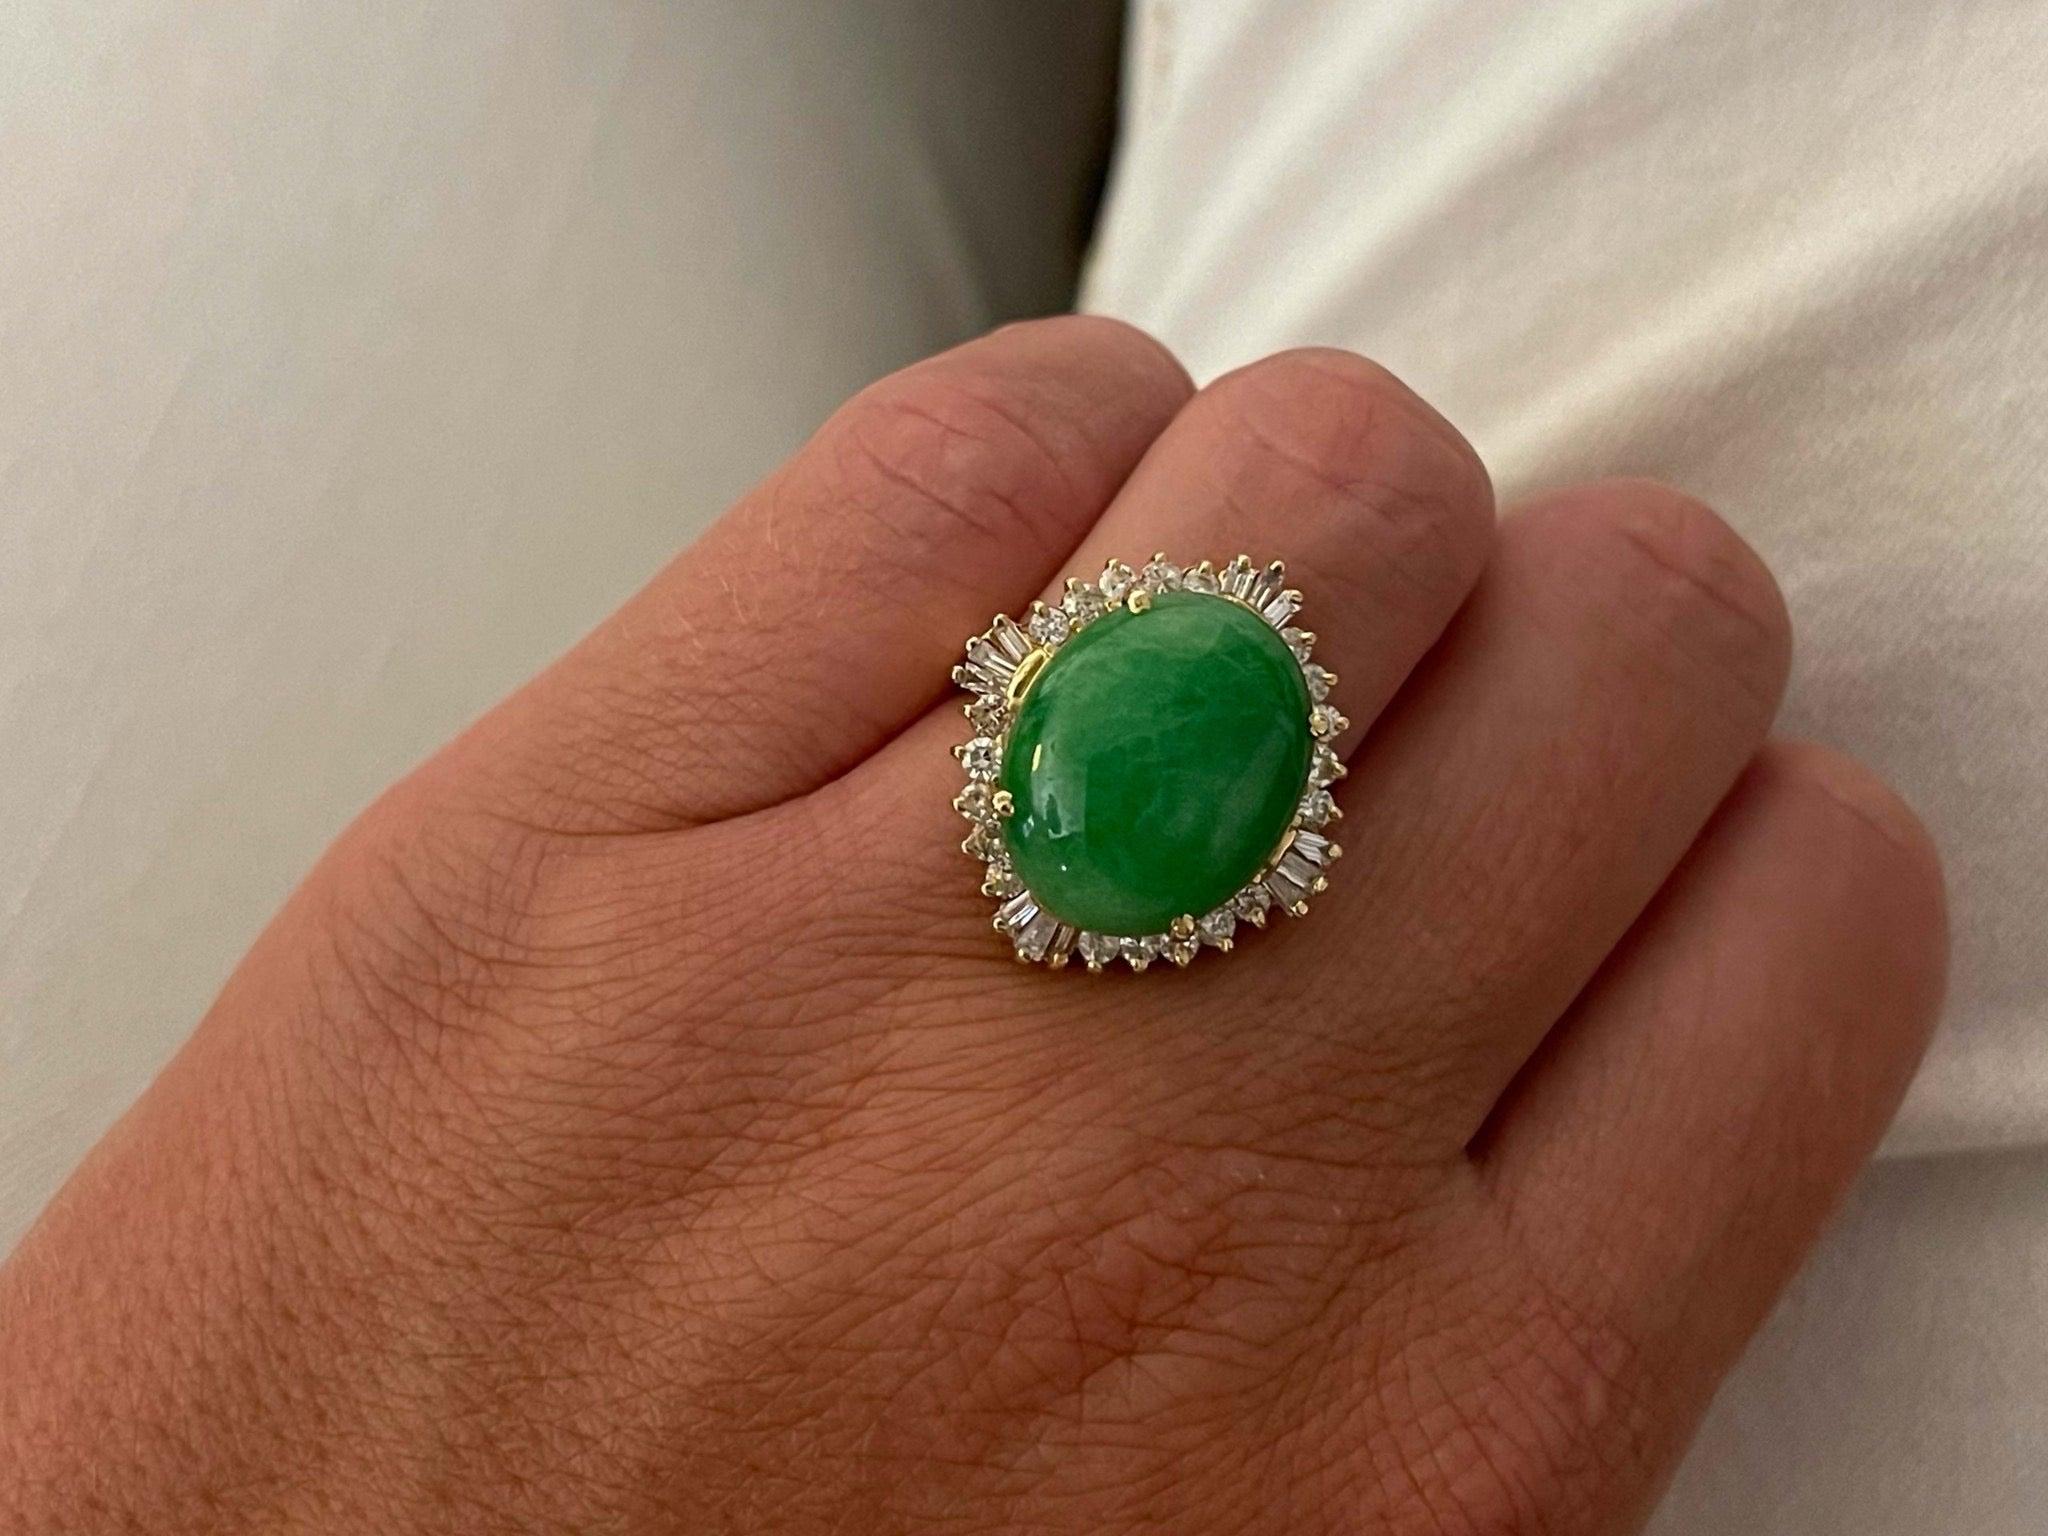 Item Specifications:

Metal: 18K Yellow Gold 

Style: Statement Ring

Ring Size: 5.5 (resizing available for a fee)

Total Weight: 8.7 Grams

Gemstone Specifications:

Center Gemstone: Jadeite Jade

Shape: Oval

Color: Green

Cut: Cabochon 

Jade